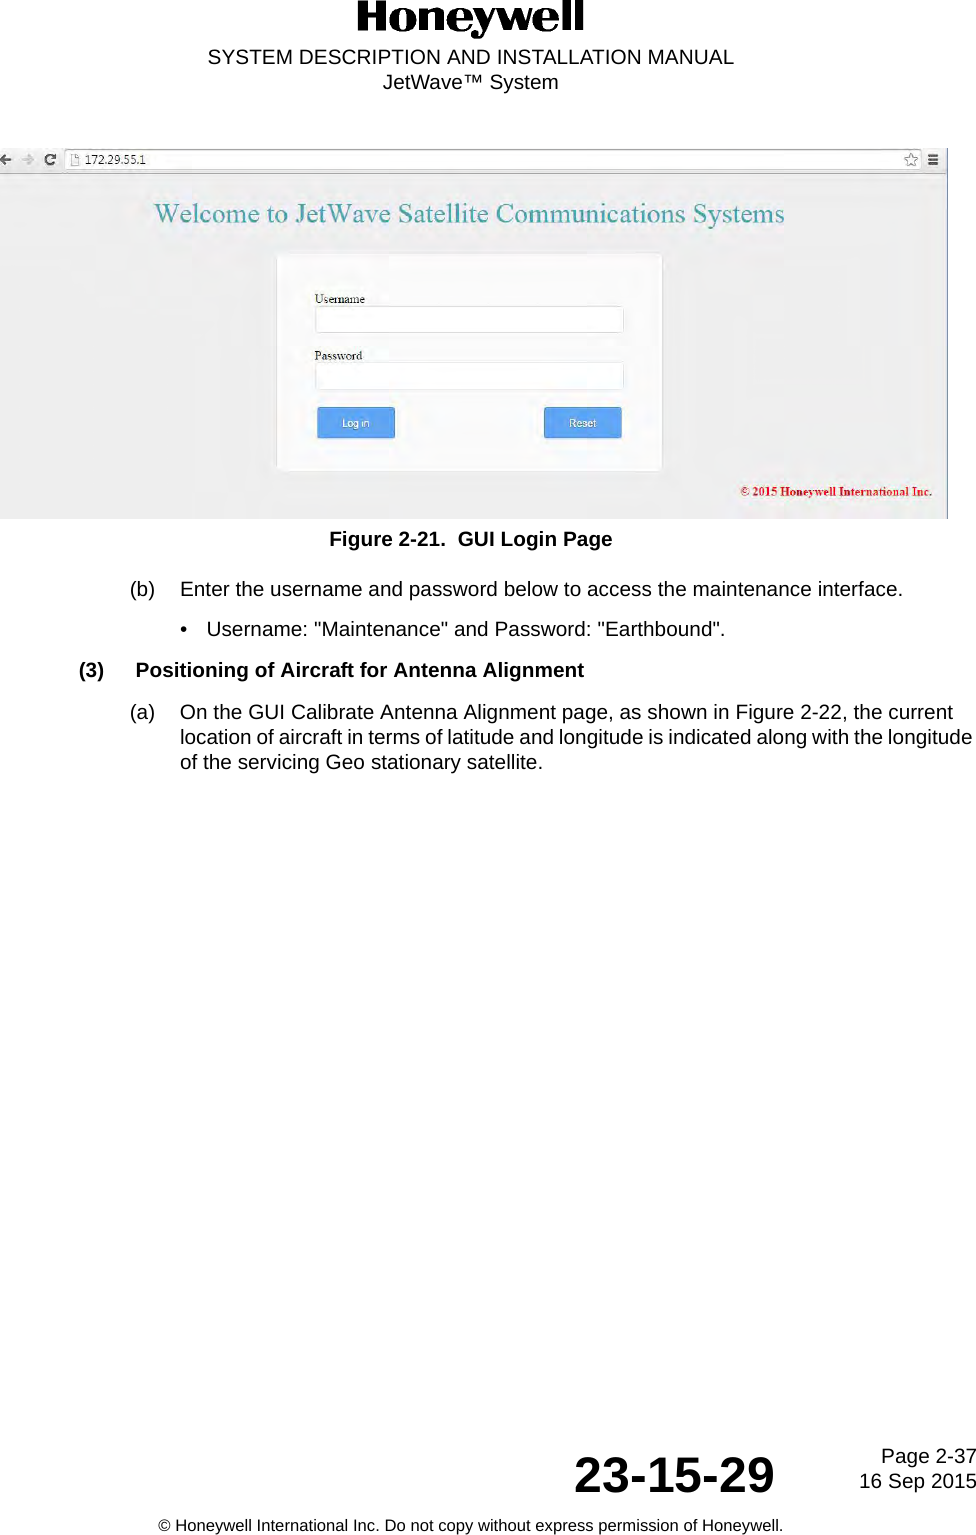 Page 2-37 16 Sep 201523-15-29SYSTEM DESCRIPTION AND INSTALLATION MANUALJetWave™ System© Honeywell International Inc. Do not copy without express permission of Honeywell.Figure 2-21.  GUI Login Page(b) Enter the username and password below to access the maintenance interface.• Username: &quot;Maintenance&quot; and Password: &quot;Earthbound&quot;.(3) Positioning of Aircraft for Antenna Alignment(a) On the GUI Calibrate Antenna Alignment page, as shown in Figure 2-22, the current location of aircraft in terms of latitude and longitude is indicated along with the longitude of the servicing Geo stationary satellite. 